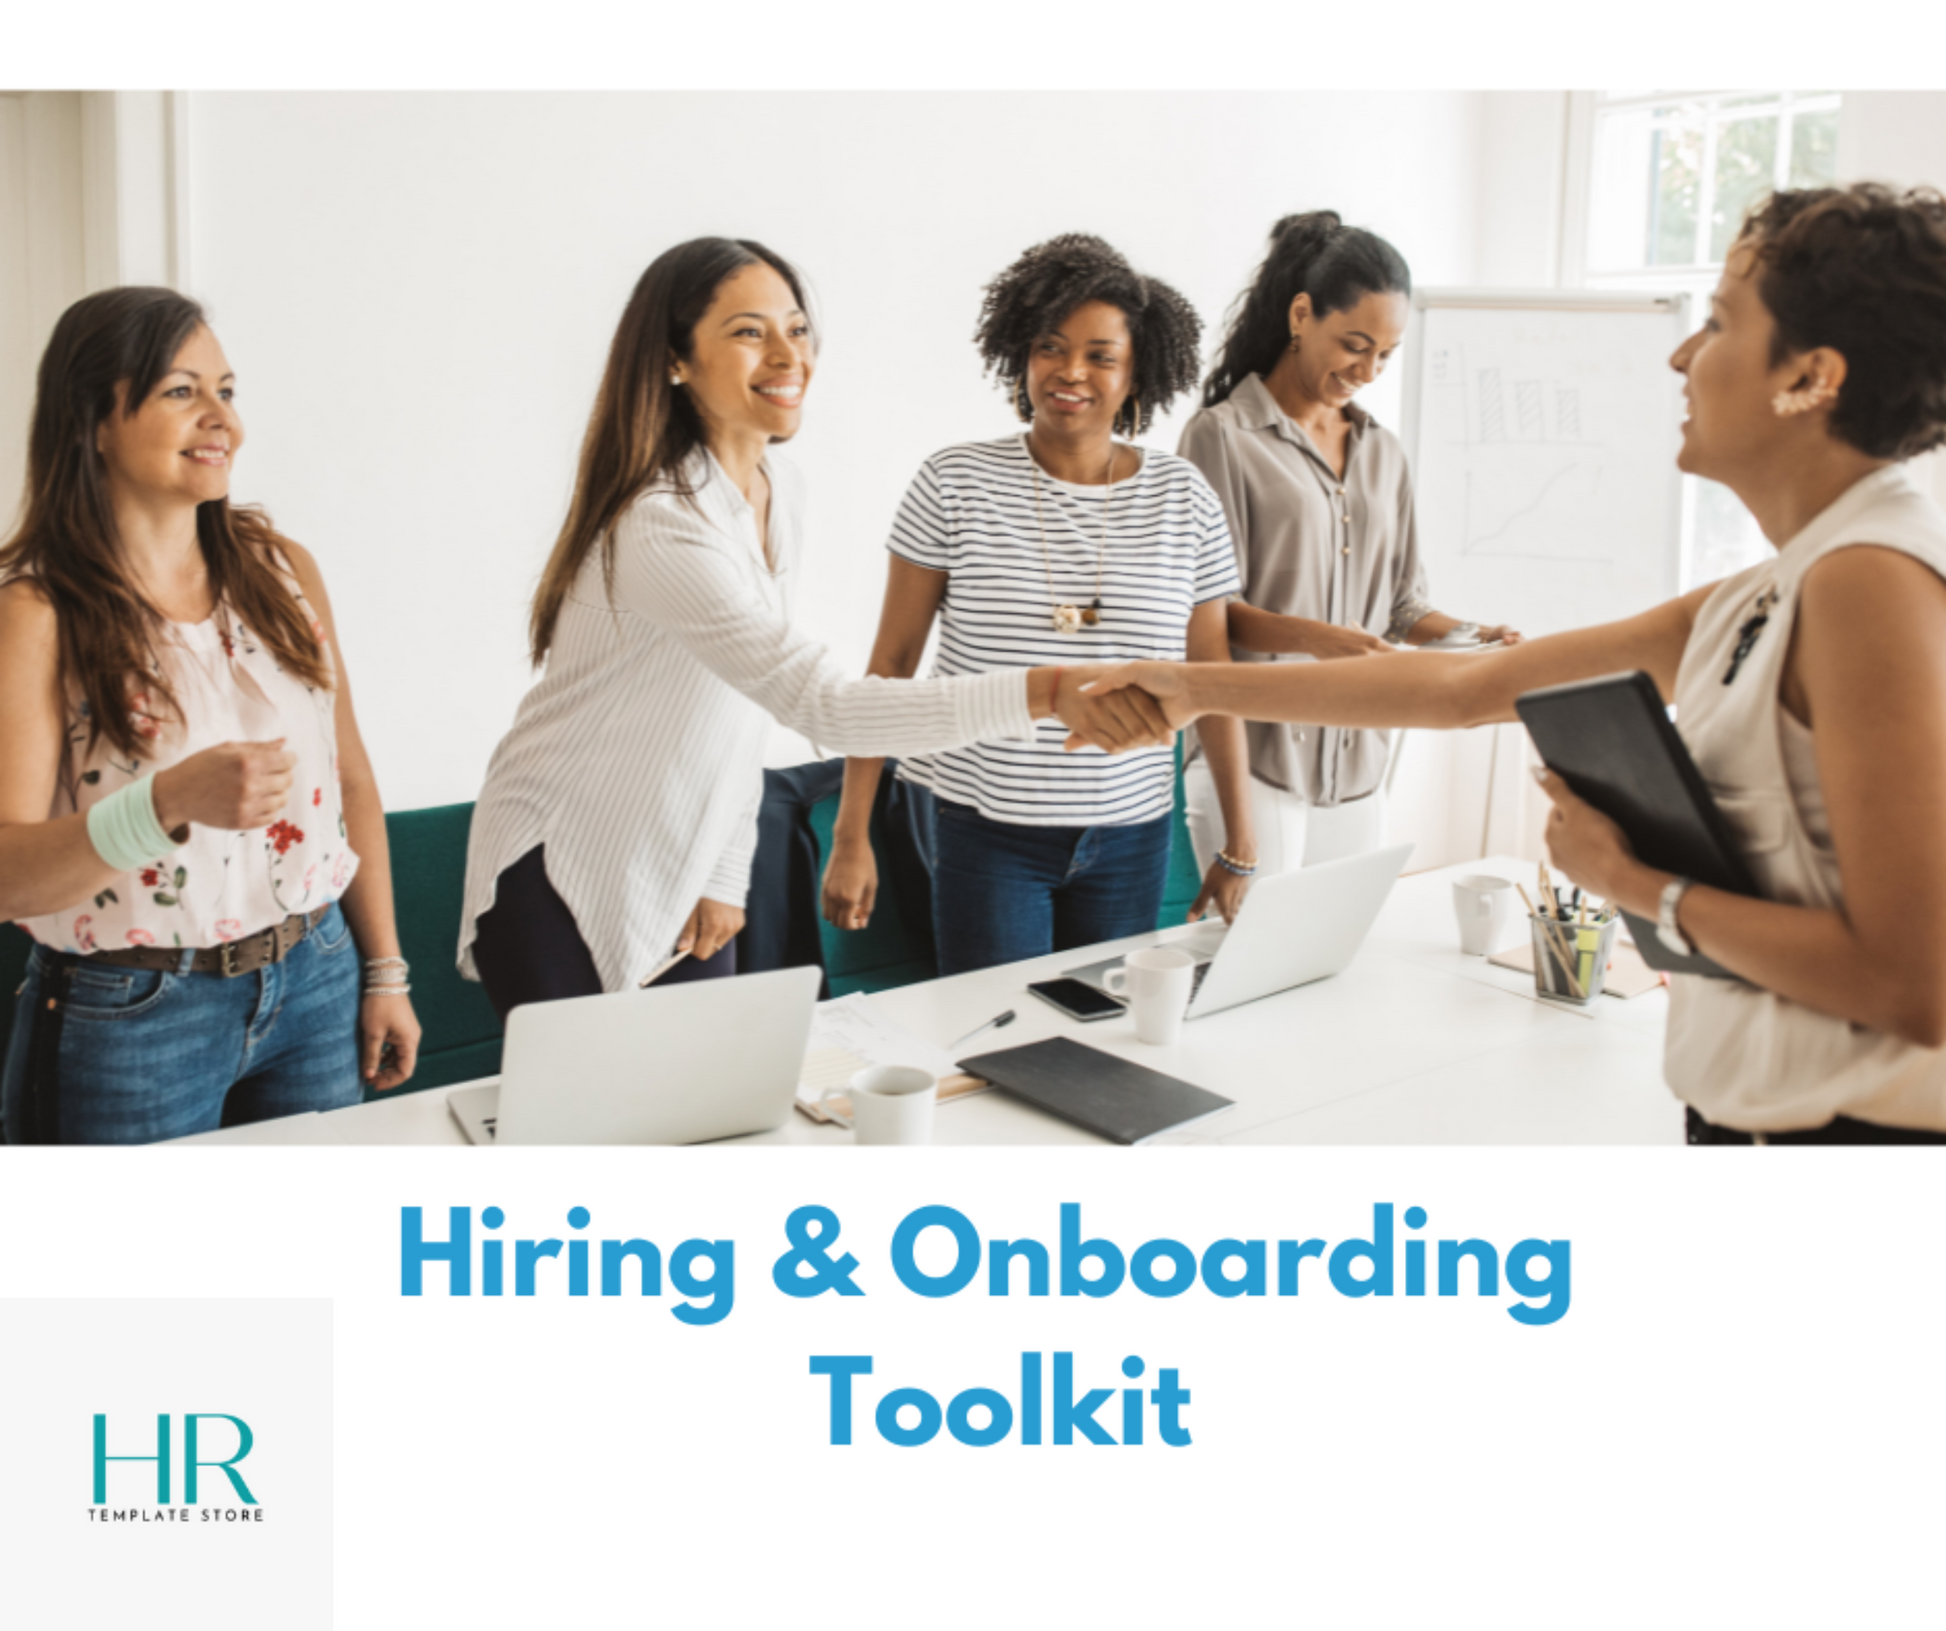 This complete bundle is designed to streamline your hiring process and set your new employee up for success. You'll have everything you need to create an effective onboarding process introducing them to your company culture, policies, and procedures.Two women shaking hands in a professional setting, representing recruitment and hiring. The image emphasizes diversity and gender equality in the workplace.